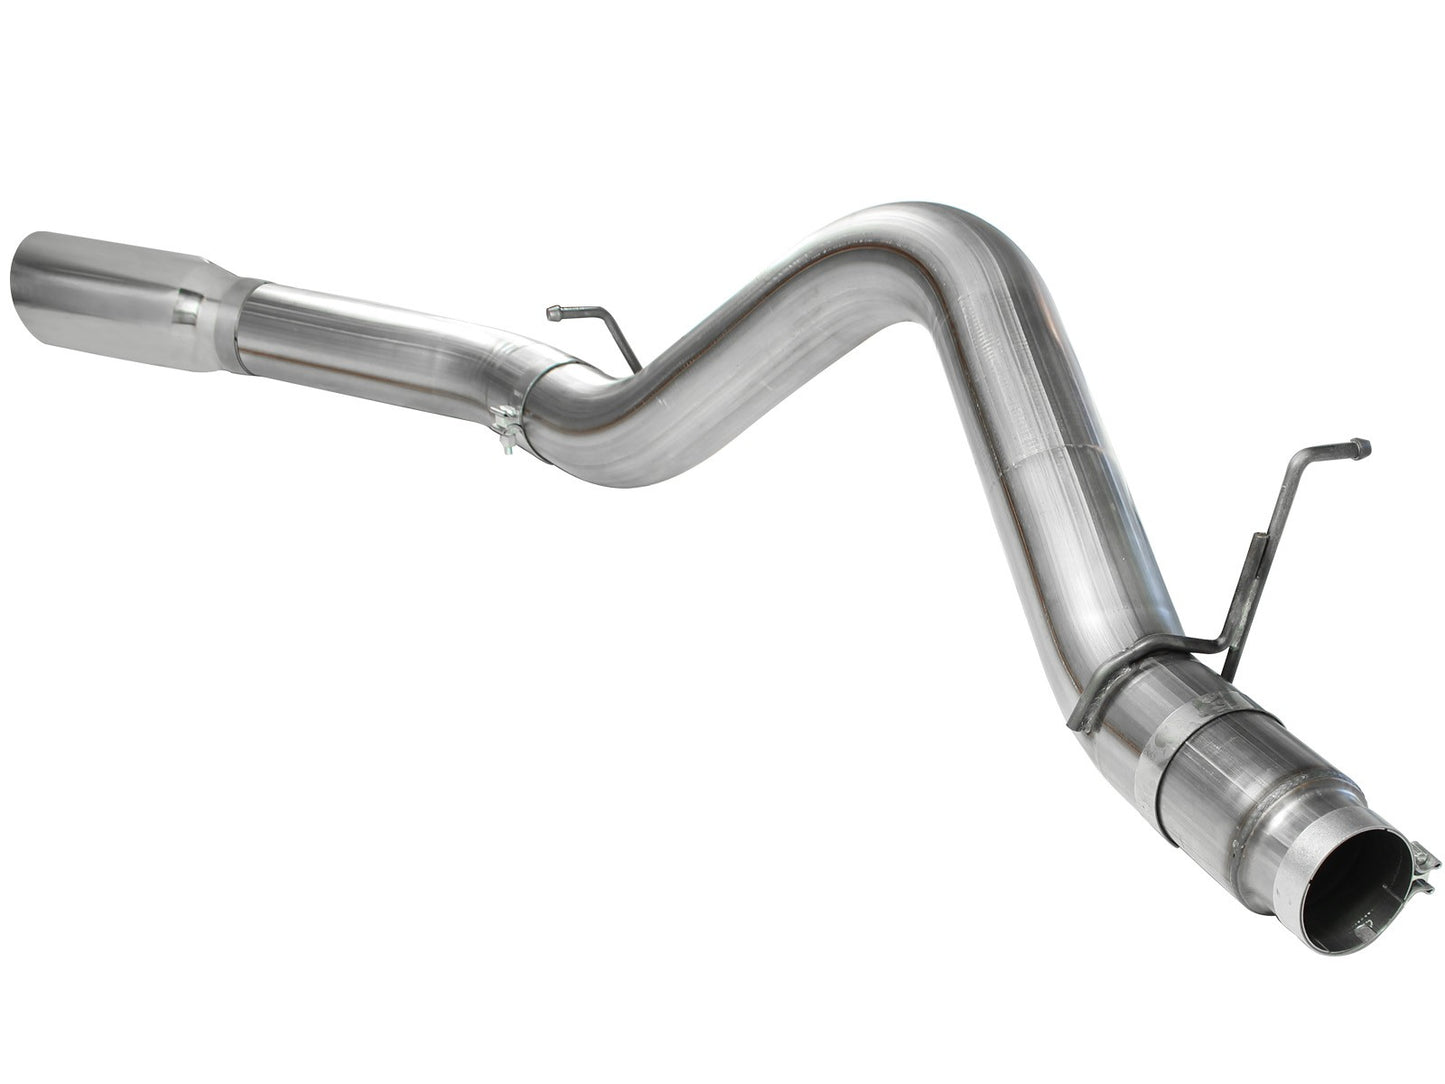 aFe Large Bore-HD 5-in 409 Stainless Steel DPF-Back Exhaust System with Polished Tip Chevrolet Silverado 2500 HD 2011-2016 / Silverado 3500 HD 2011-2016 / GMC Sierra 2500 HD 2011-2016 / Sierra 3500 HD 2011-2016 | 49-44041-P